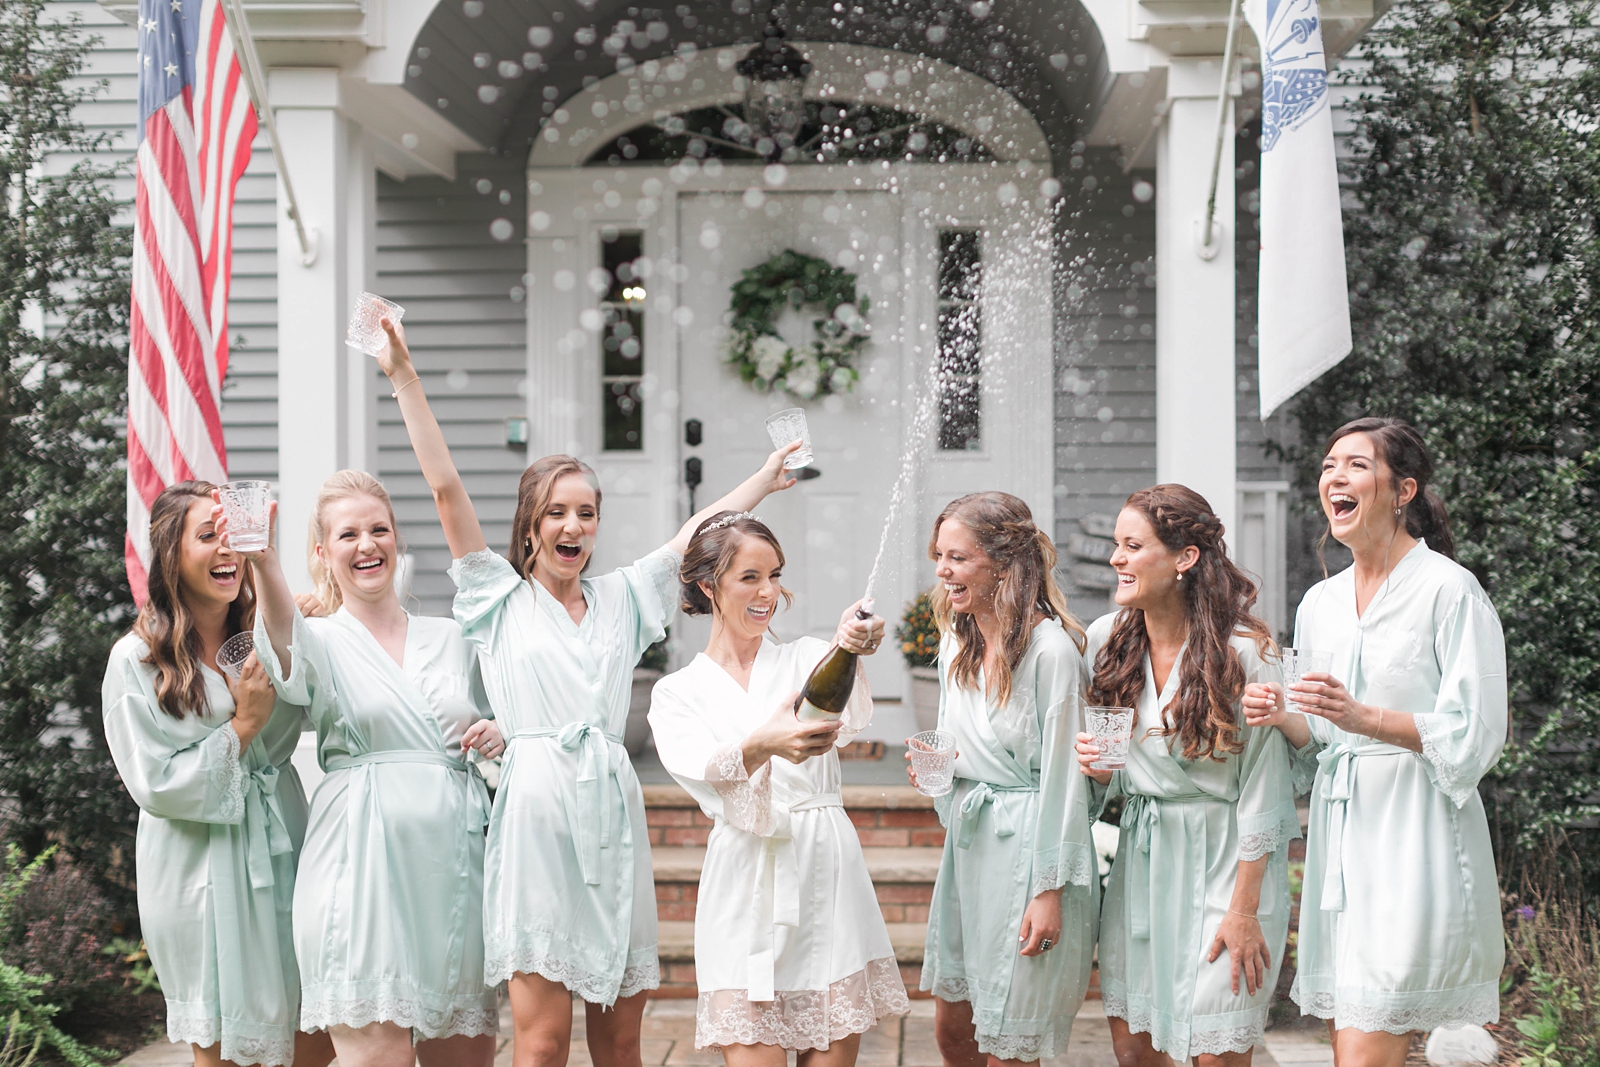 bride and bridesmaids pop champagne on wedding day wearing light green robes